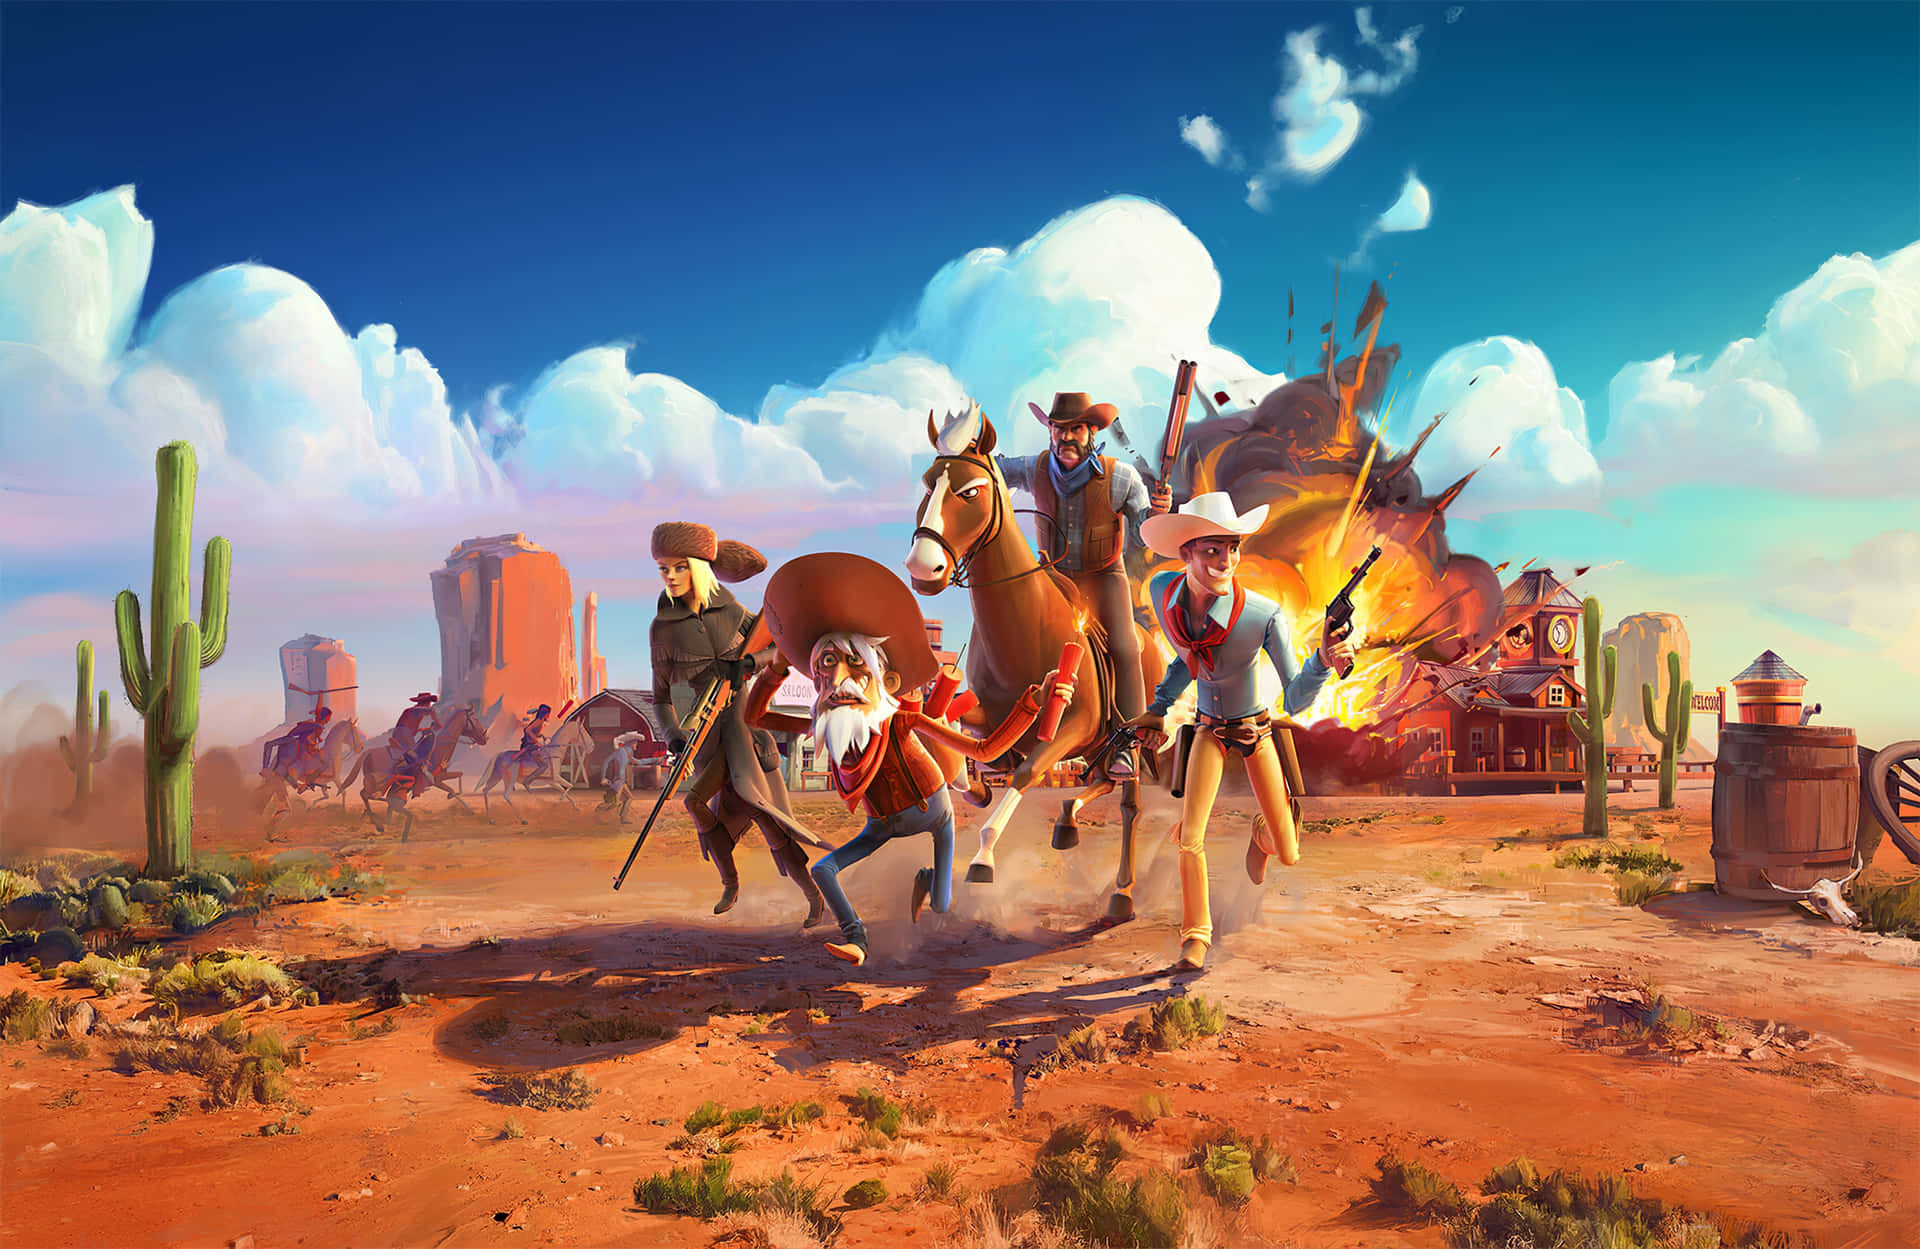 Wildwest Thema Wallpaper